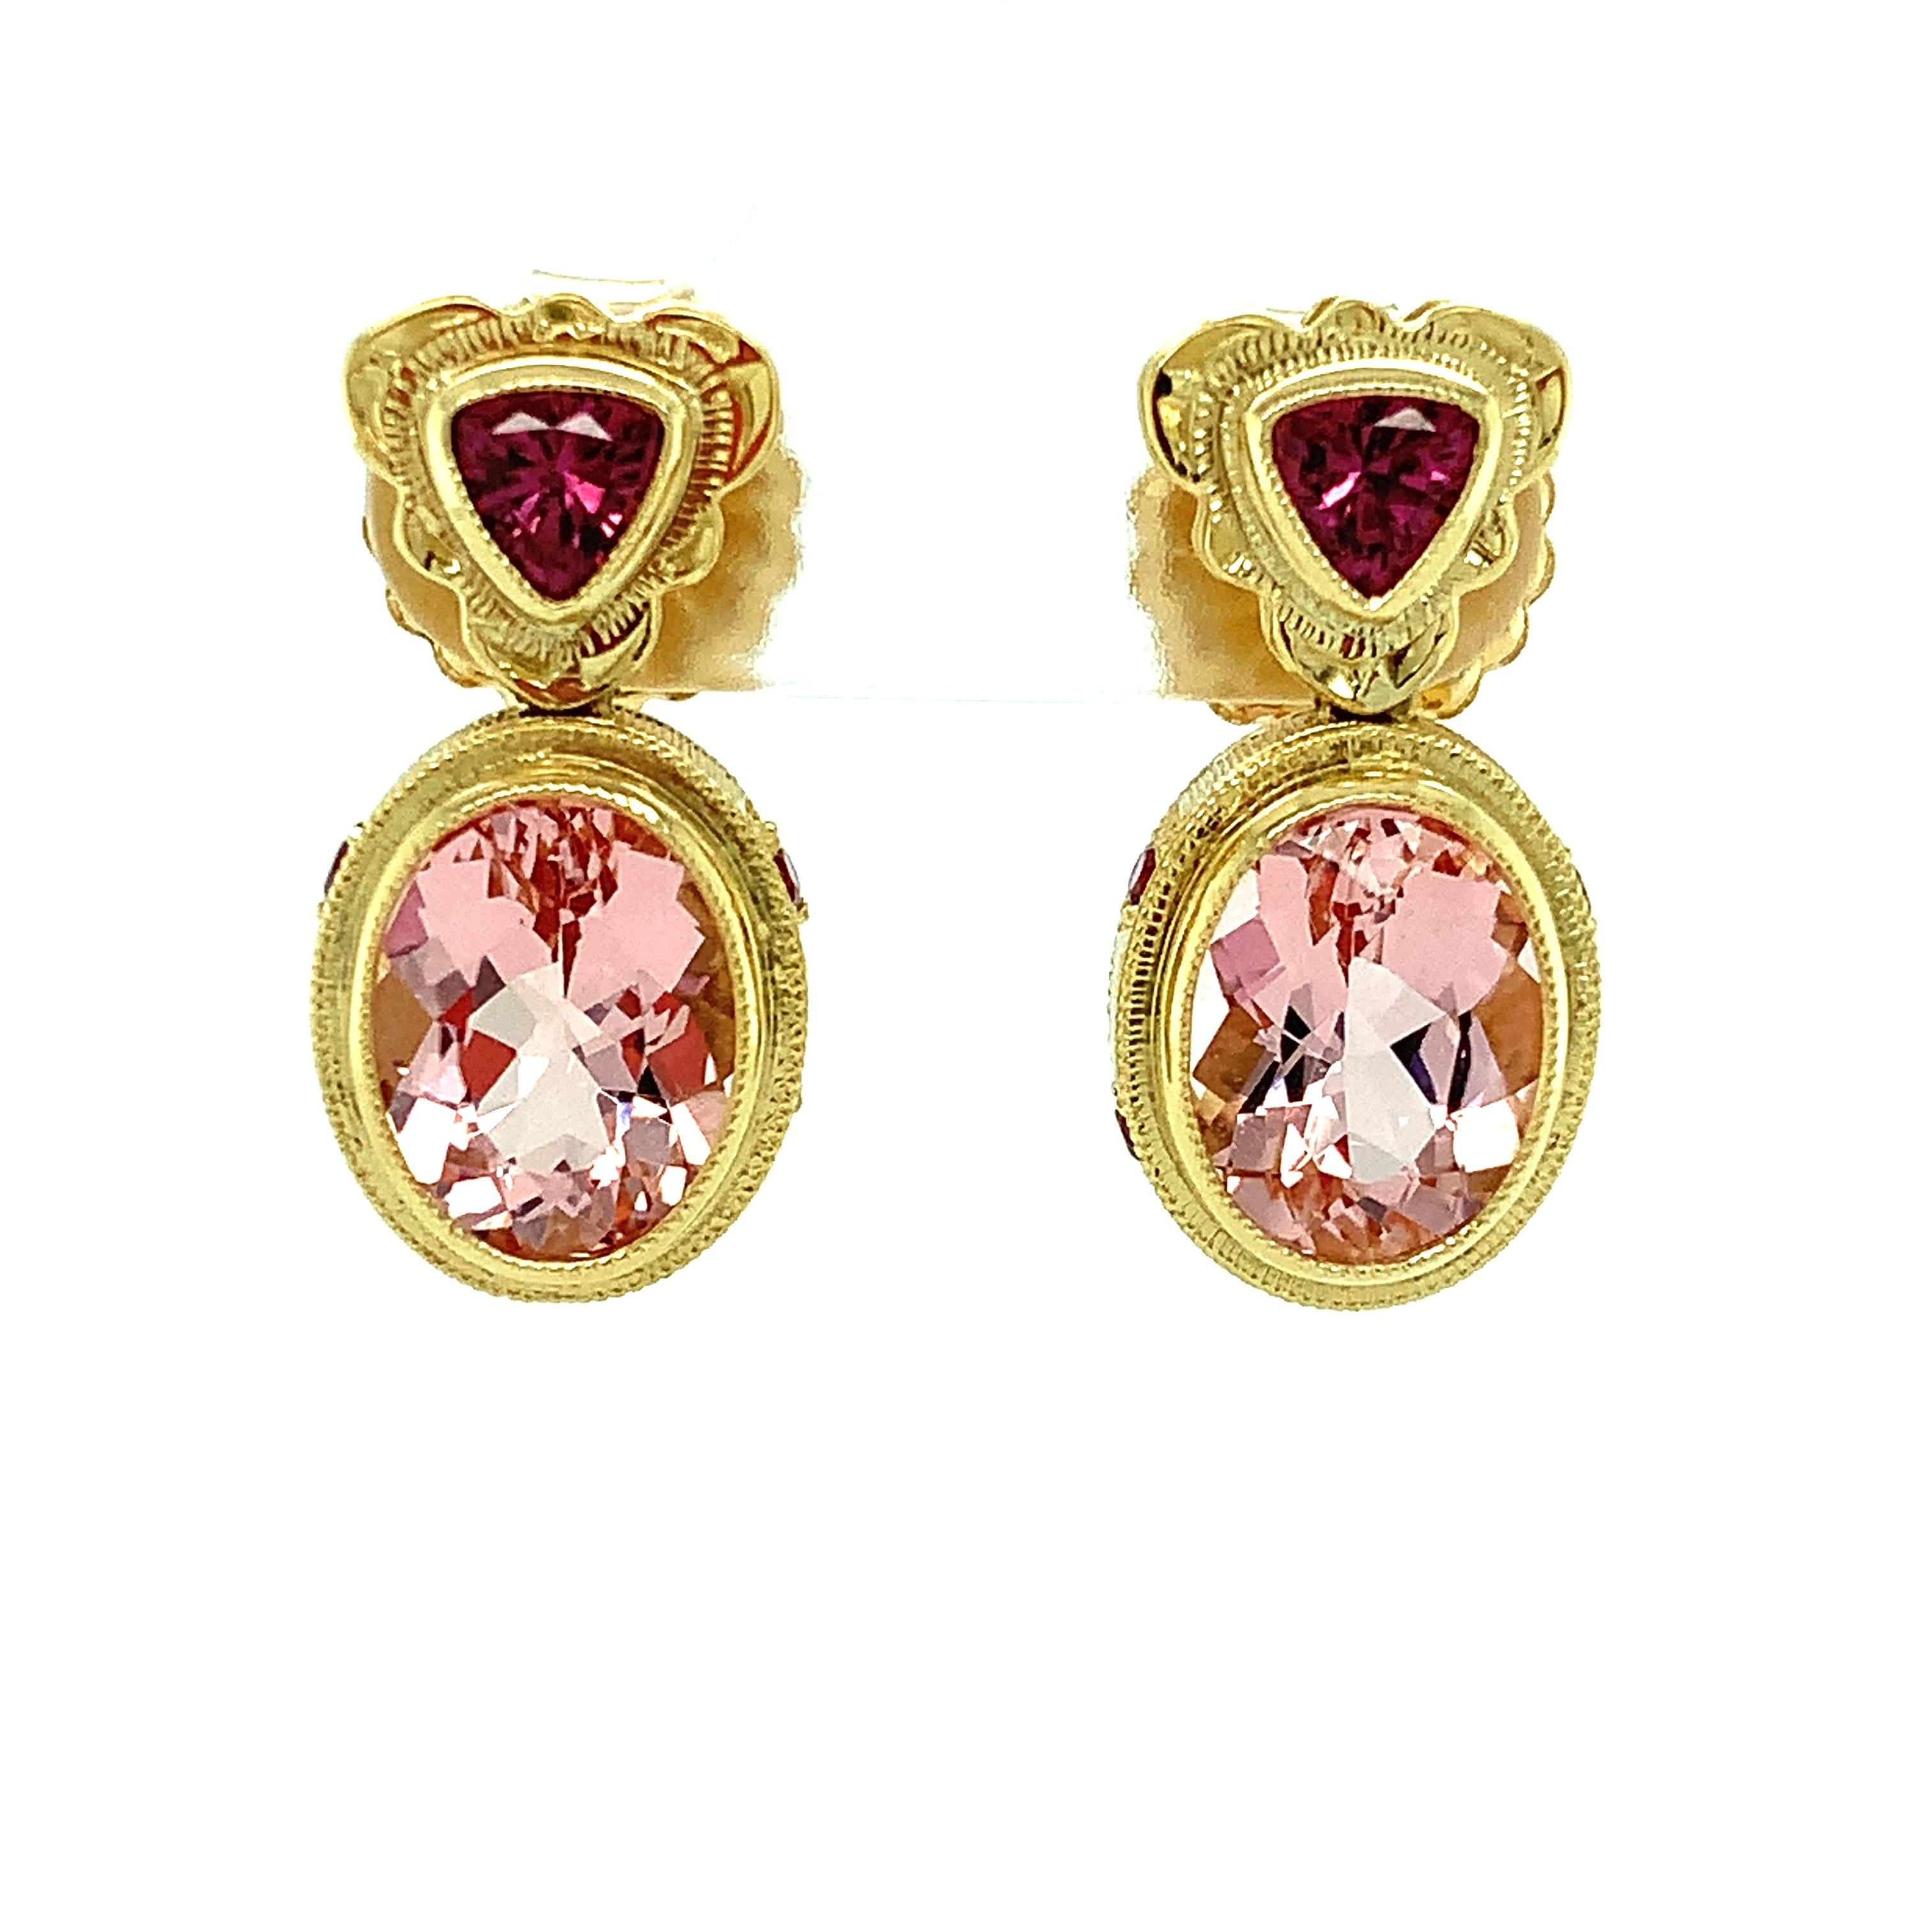 These exquisite dangling earrings feature stunning pink morganites set in handmade 18k yellow gold bezels accented with rose-colored rhodolite garnets. Morganite belongs to the same mineral family as aquamarine and emerald, and refers to the pink